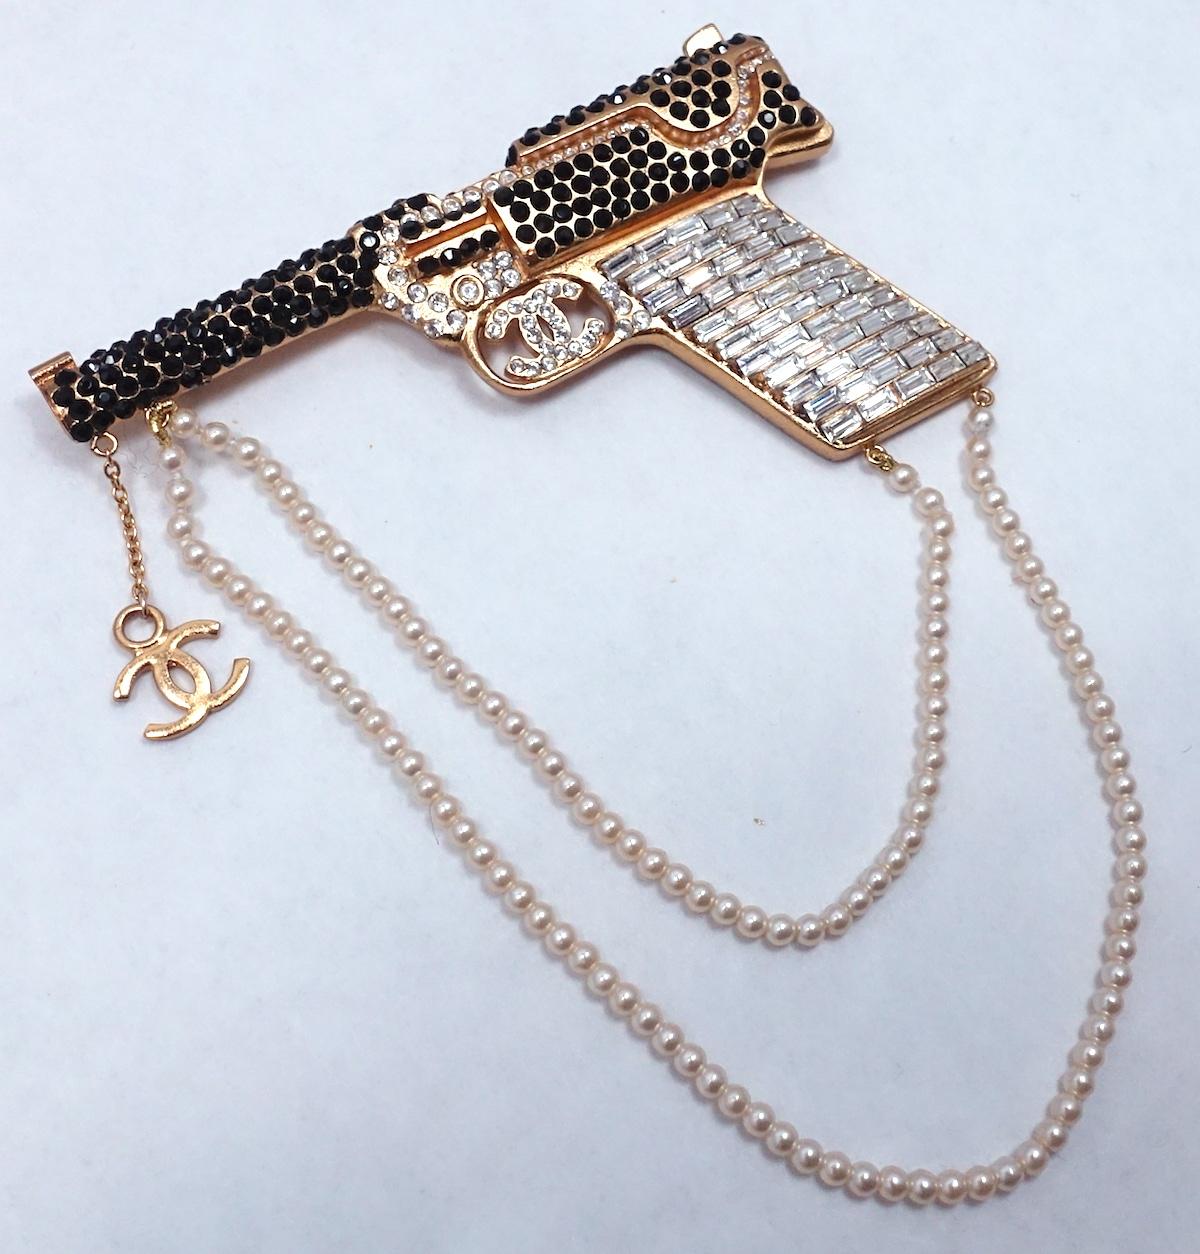 This vintage Chanel runway pistol brooch is one of the most sought after Chanel cuff bracelets. It has crystals throughout with two rows of faux pearls hanging downward and the Chanel CC logo at the end of the pistol.  In excellent condition, this